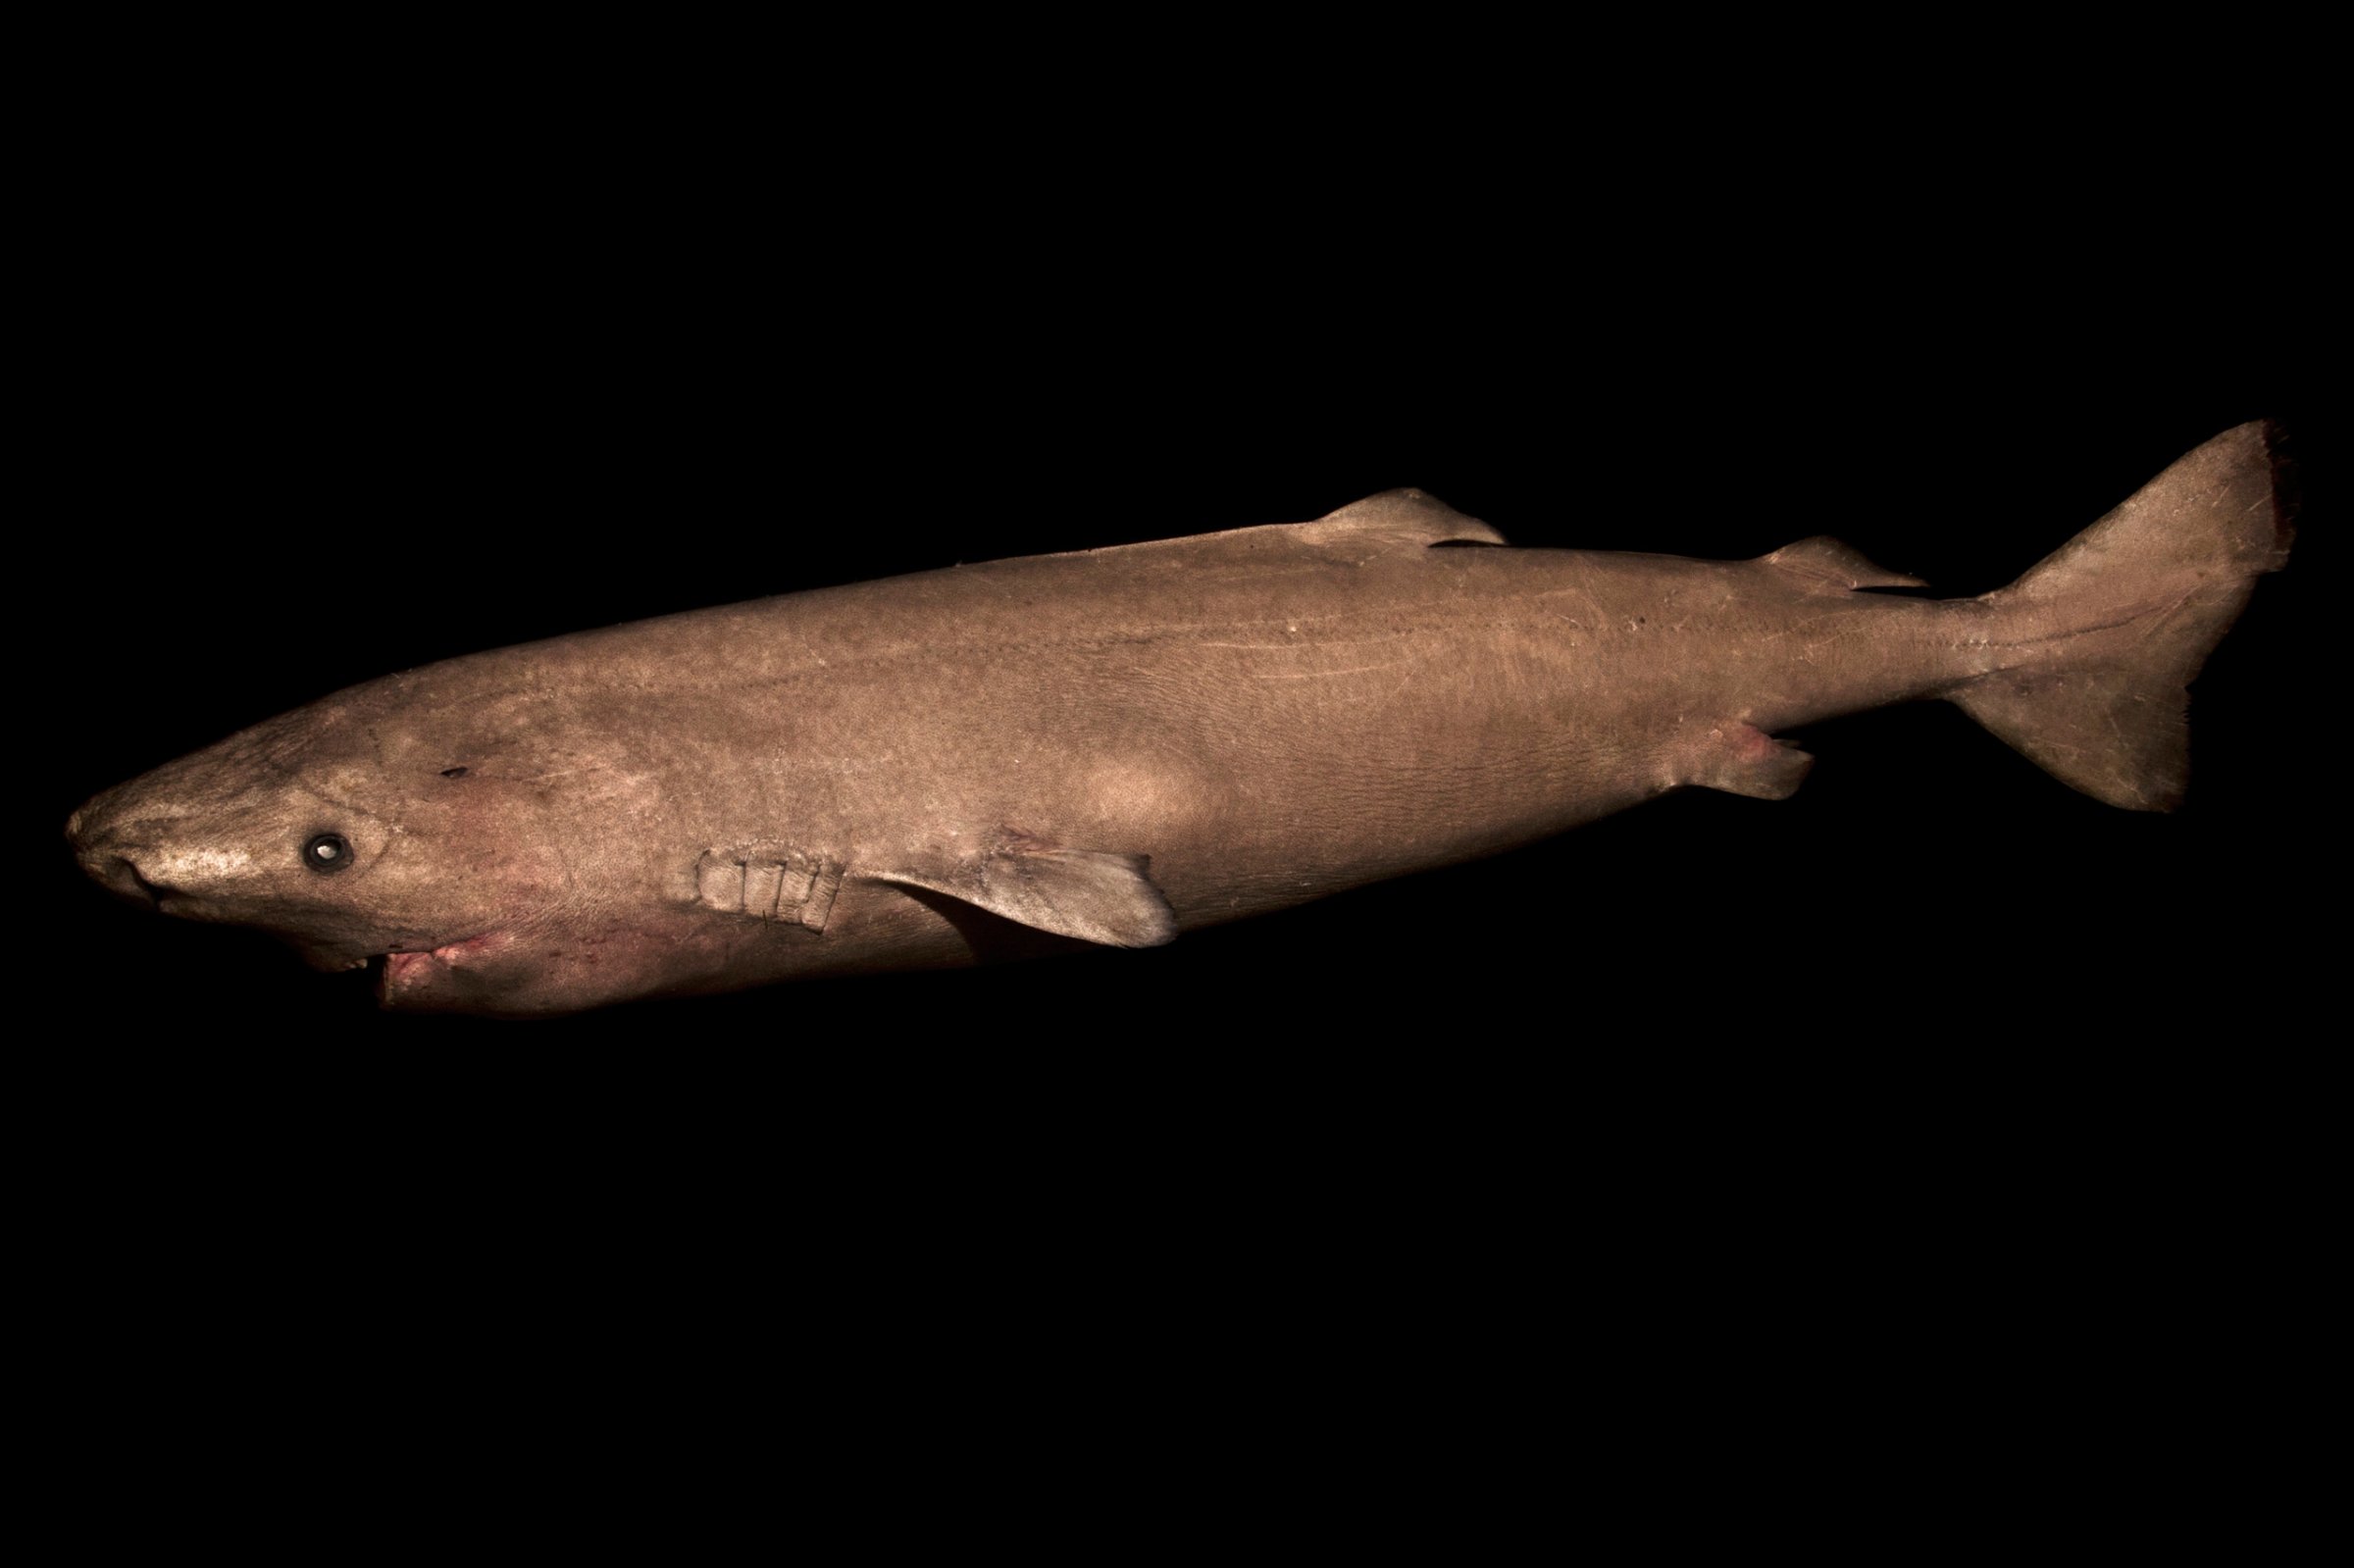 This undated photo made available by Julius Nielsen on Aug. 11, 2016 shows a two-meter-long Greenland shark female from southwestern Greenland. In a report released Thursday, Aug. 11, 2016, scientists calculate this species of shark is Earth’s oldest living animal with a backbone. They estimate that one of those they examined was born roughly 400 years ago, about the time of the Pilgrims in the U.S., and kept on swimming until it died only a couple years ago. (Julius Nielsen via AP)